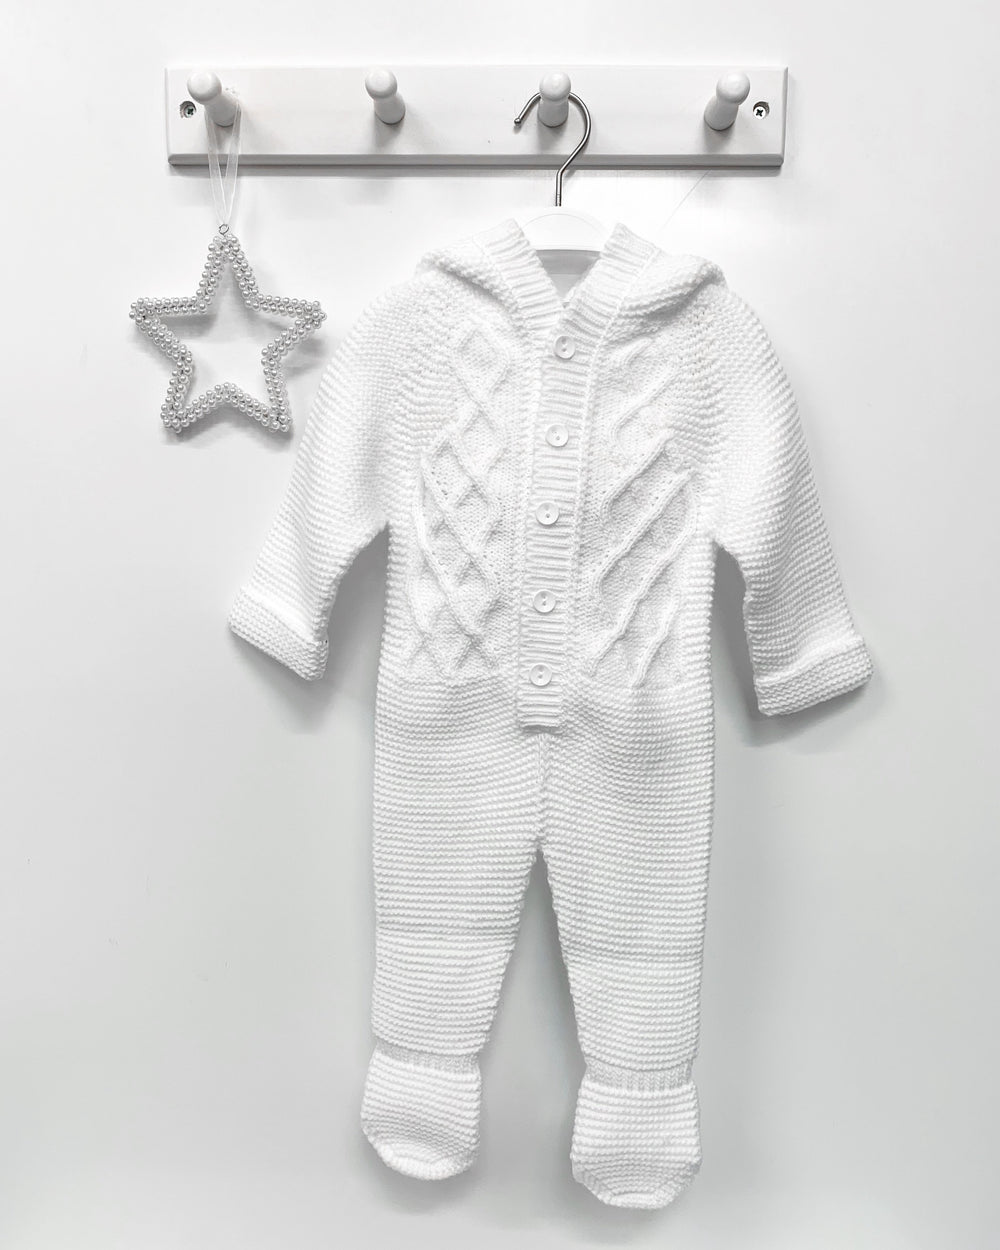 Nico Dingo BABY | White Knitted Pom Pom Pramsuit | iphoneandroidapplications